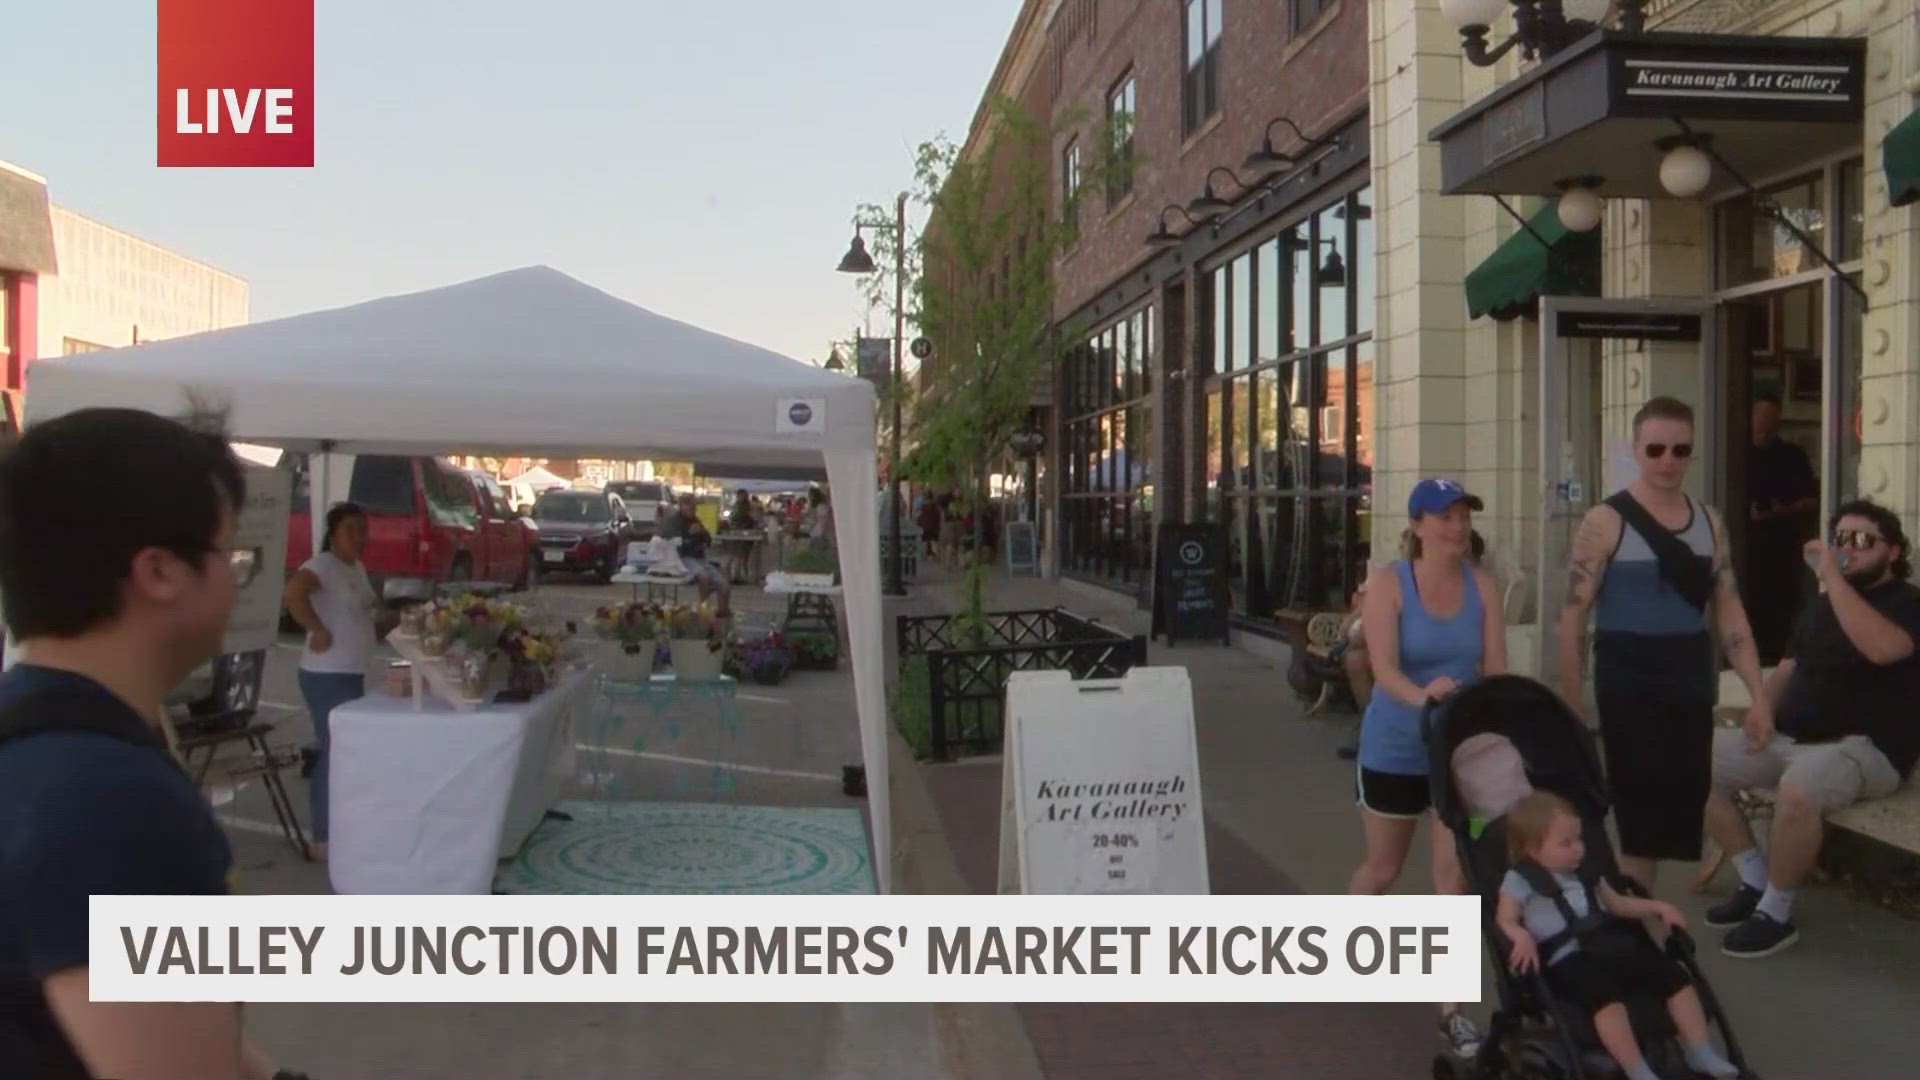 With over 30 years of community support under its belt, the market is prepared to welcome thousands through the historic Valley Junction arch each Thursday.